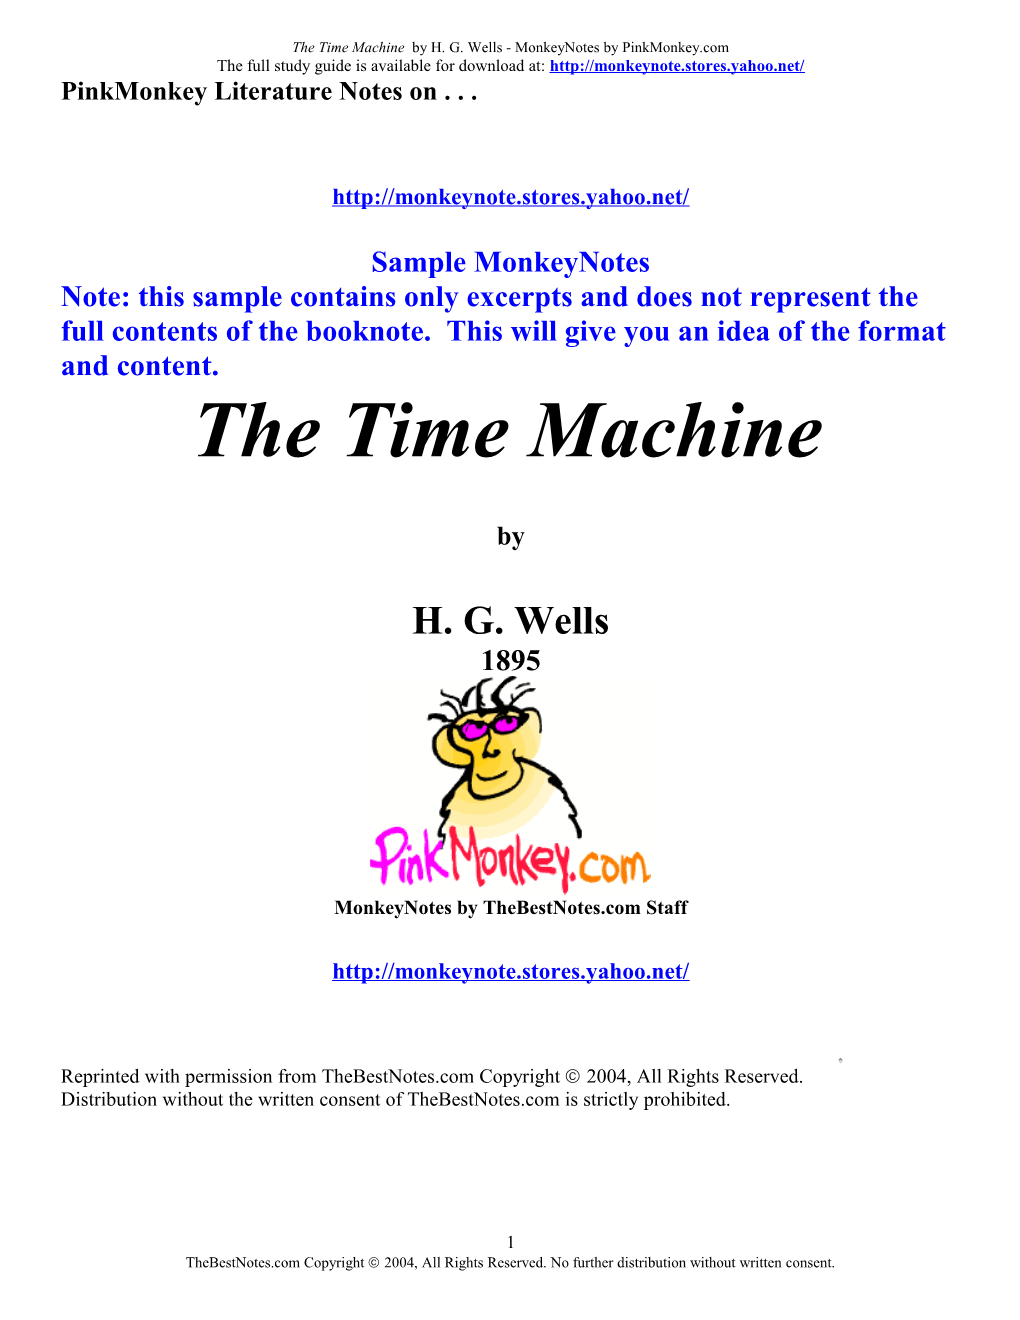 Pinkmonkey Notes for the Time Machine by H